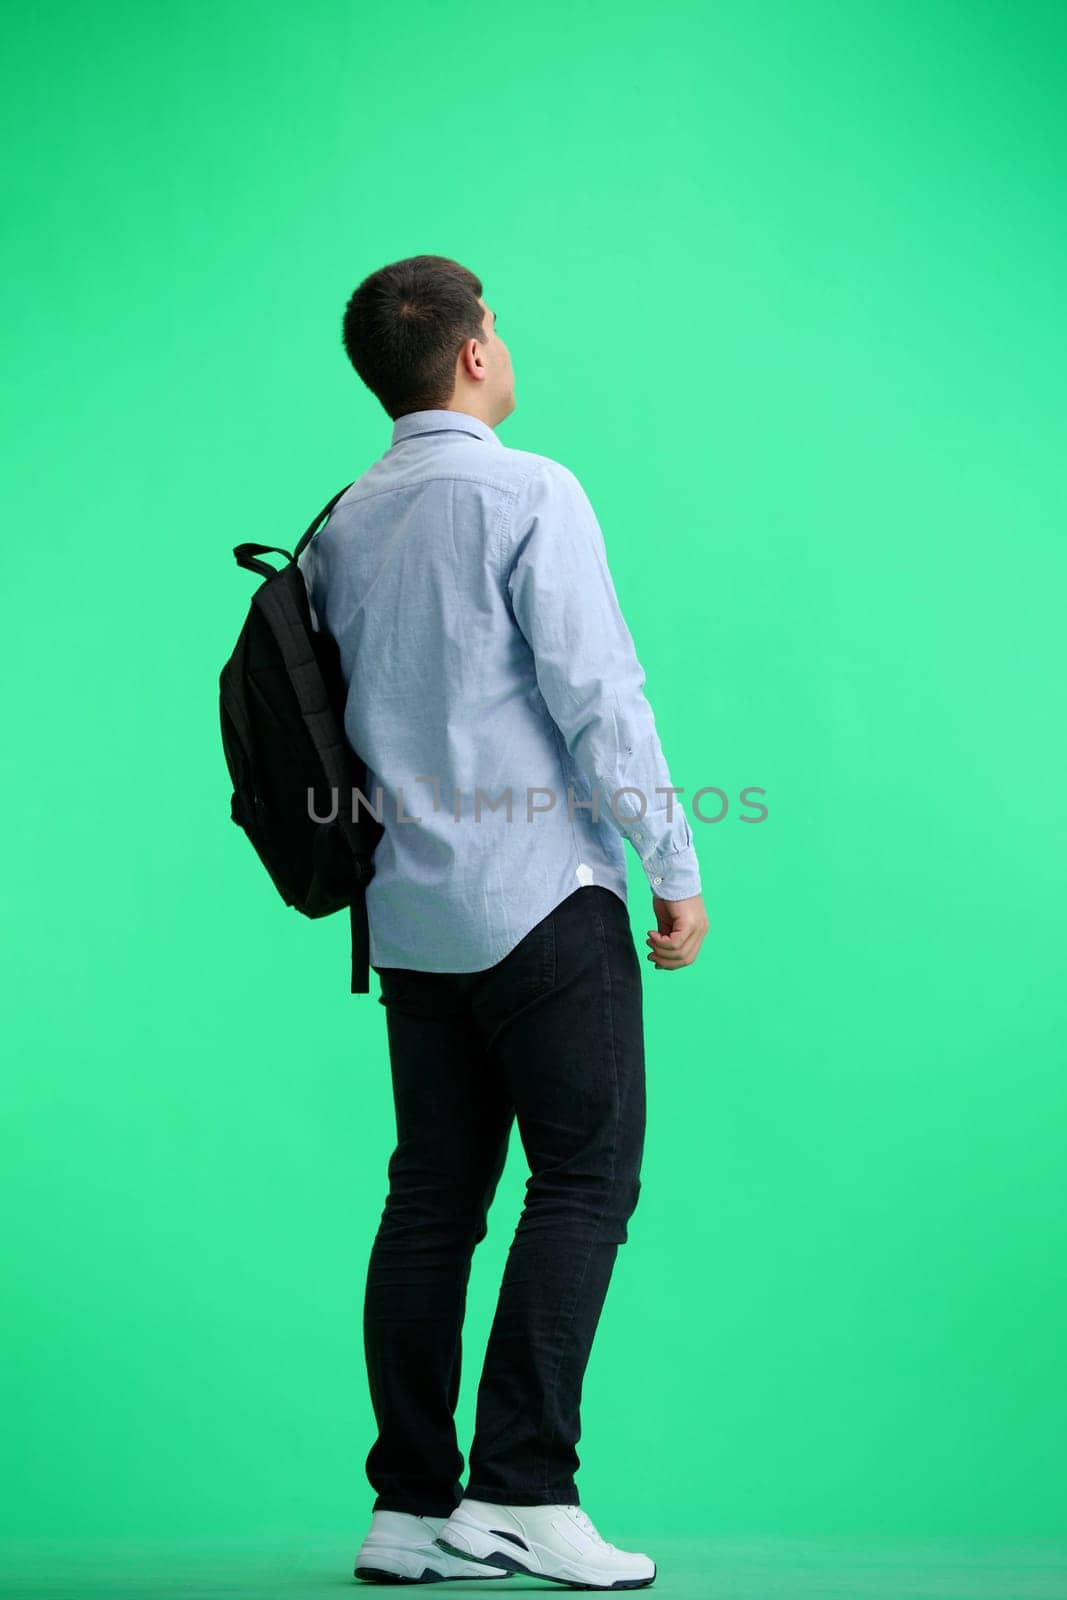 A man, full-length, on a green background, with a briefcase.